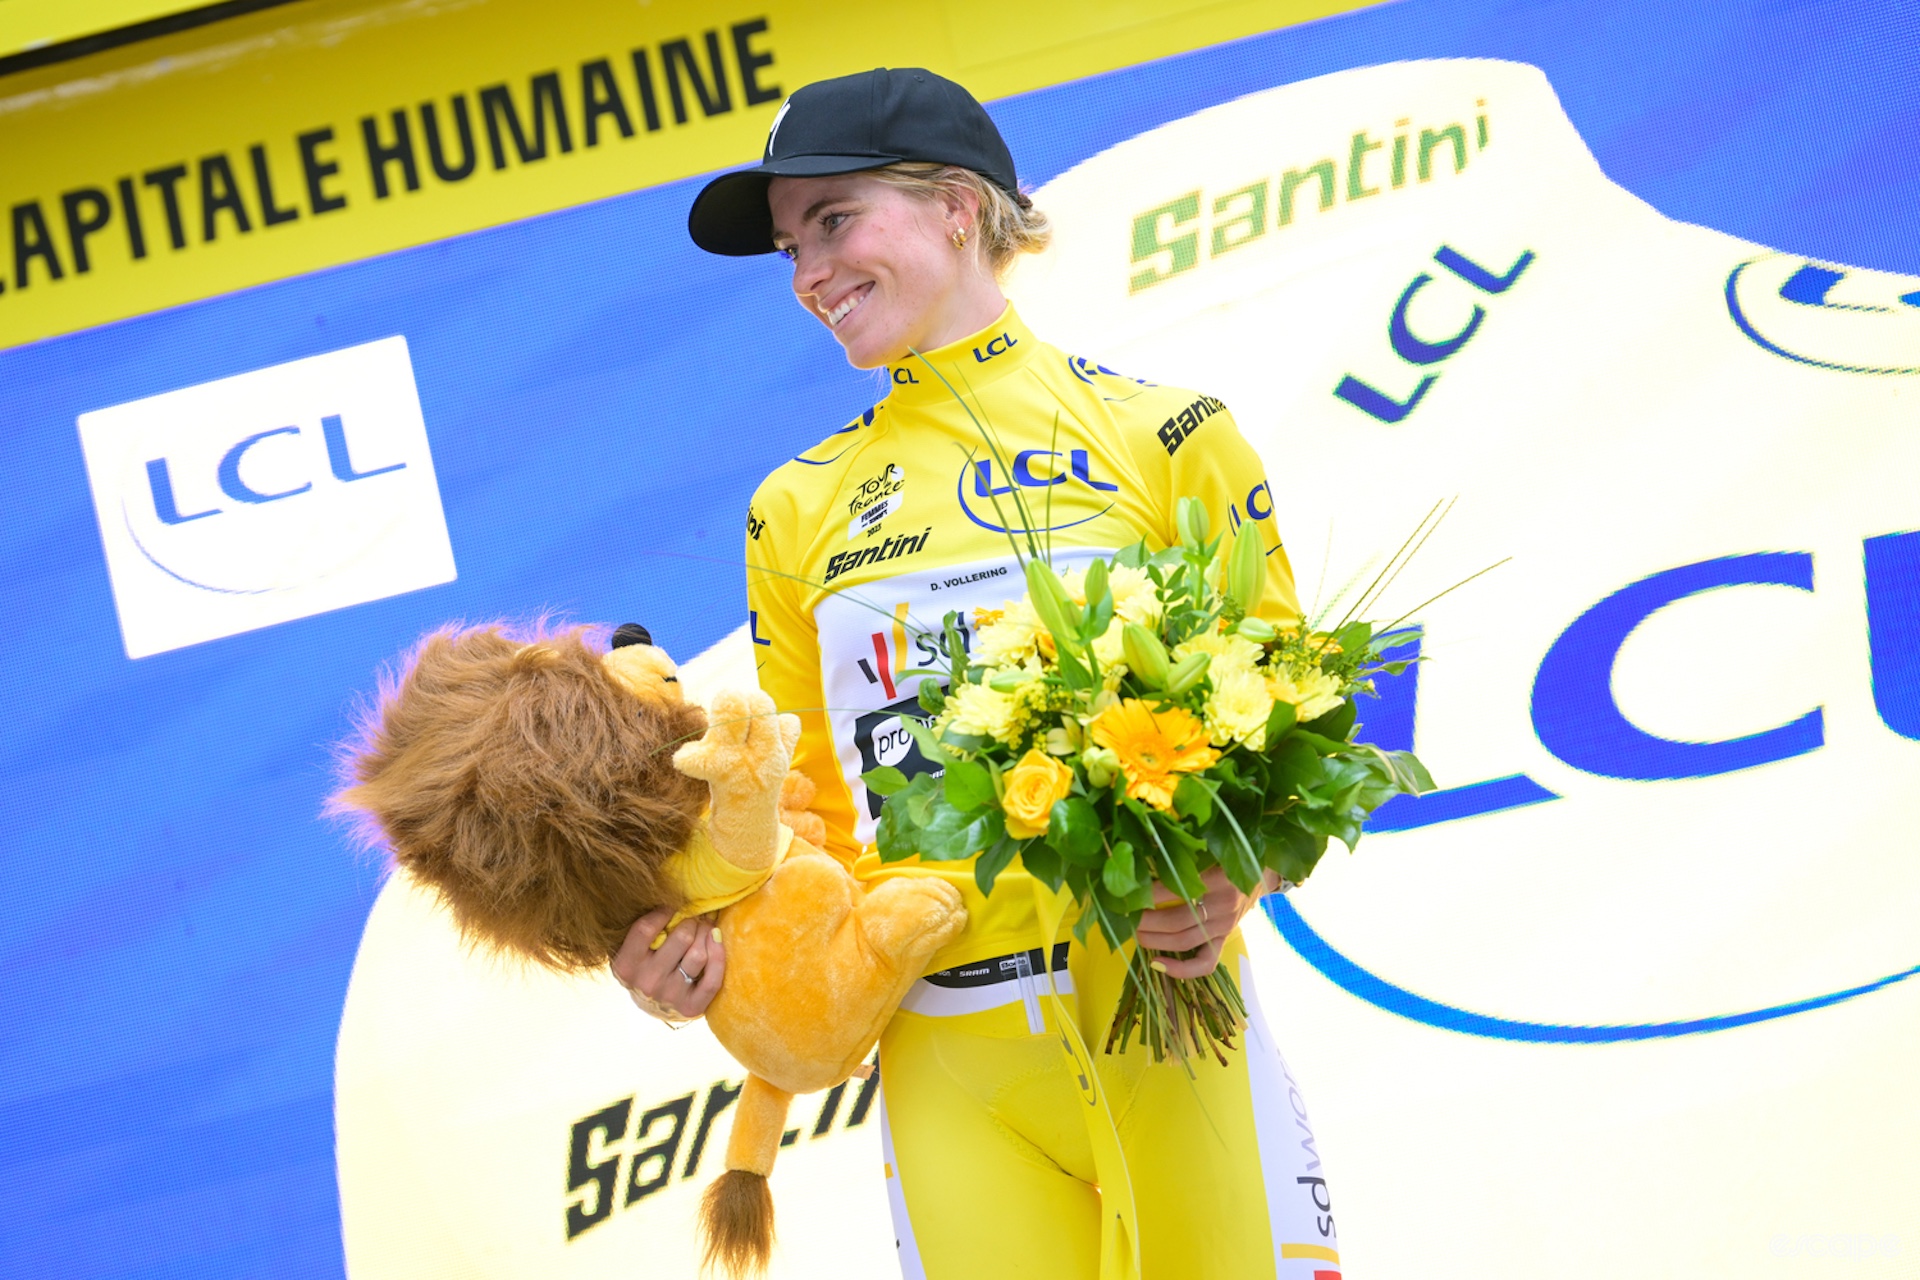 Demi Vollering, dressed in the yellow leaders jersey of the Tour de France, holds a lion and flowers and smiles at someone off picture to her right.